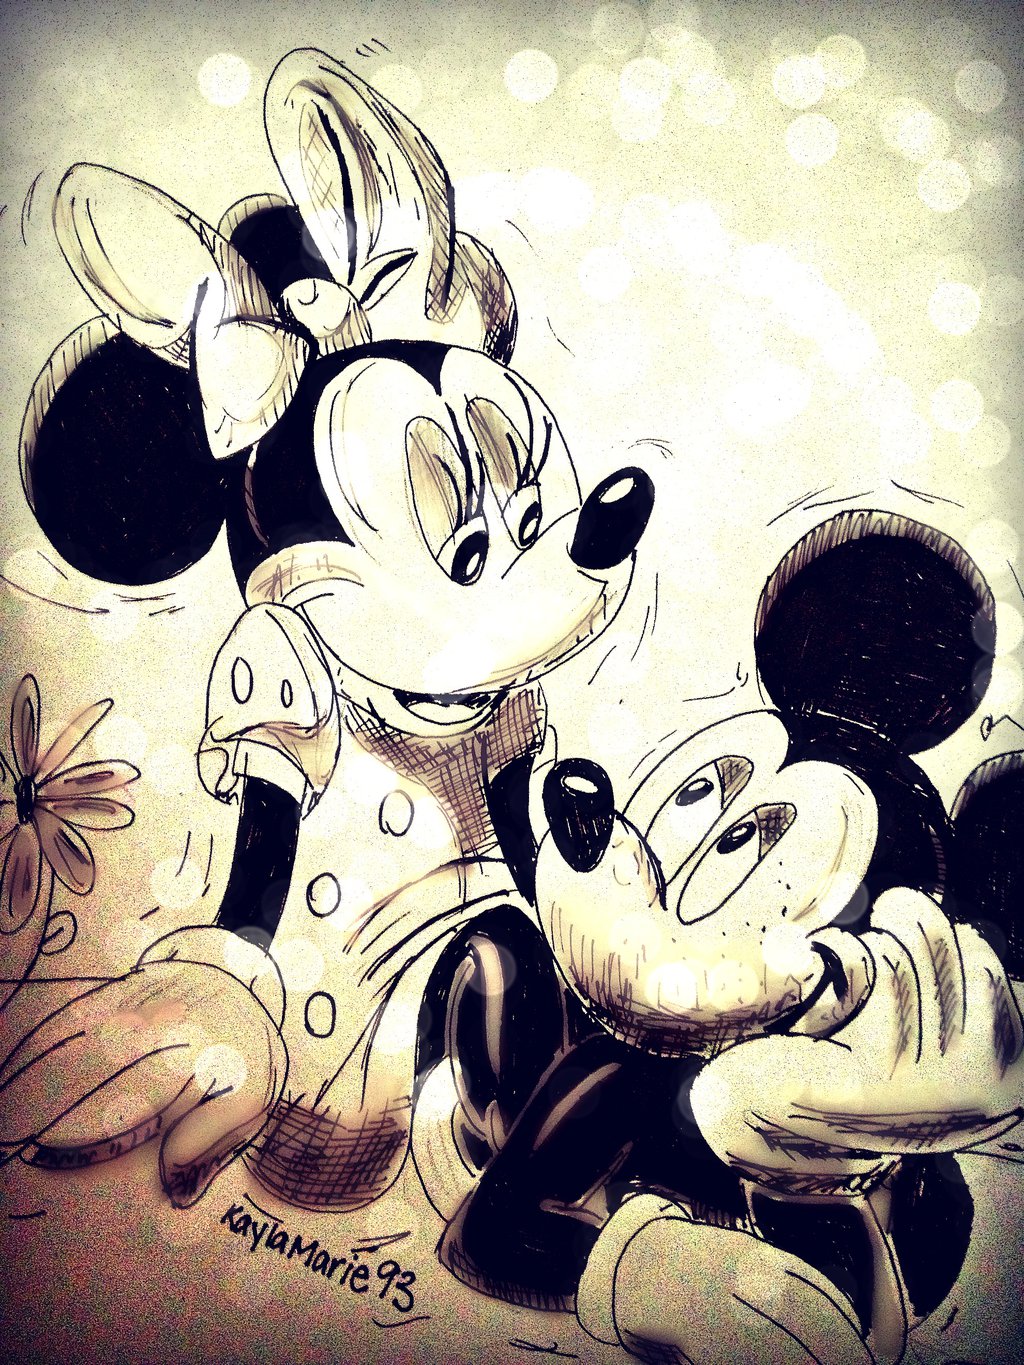 tumblr mickey mouse and minnie drawings